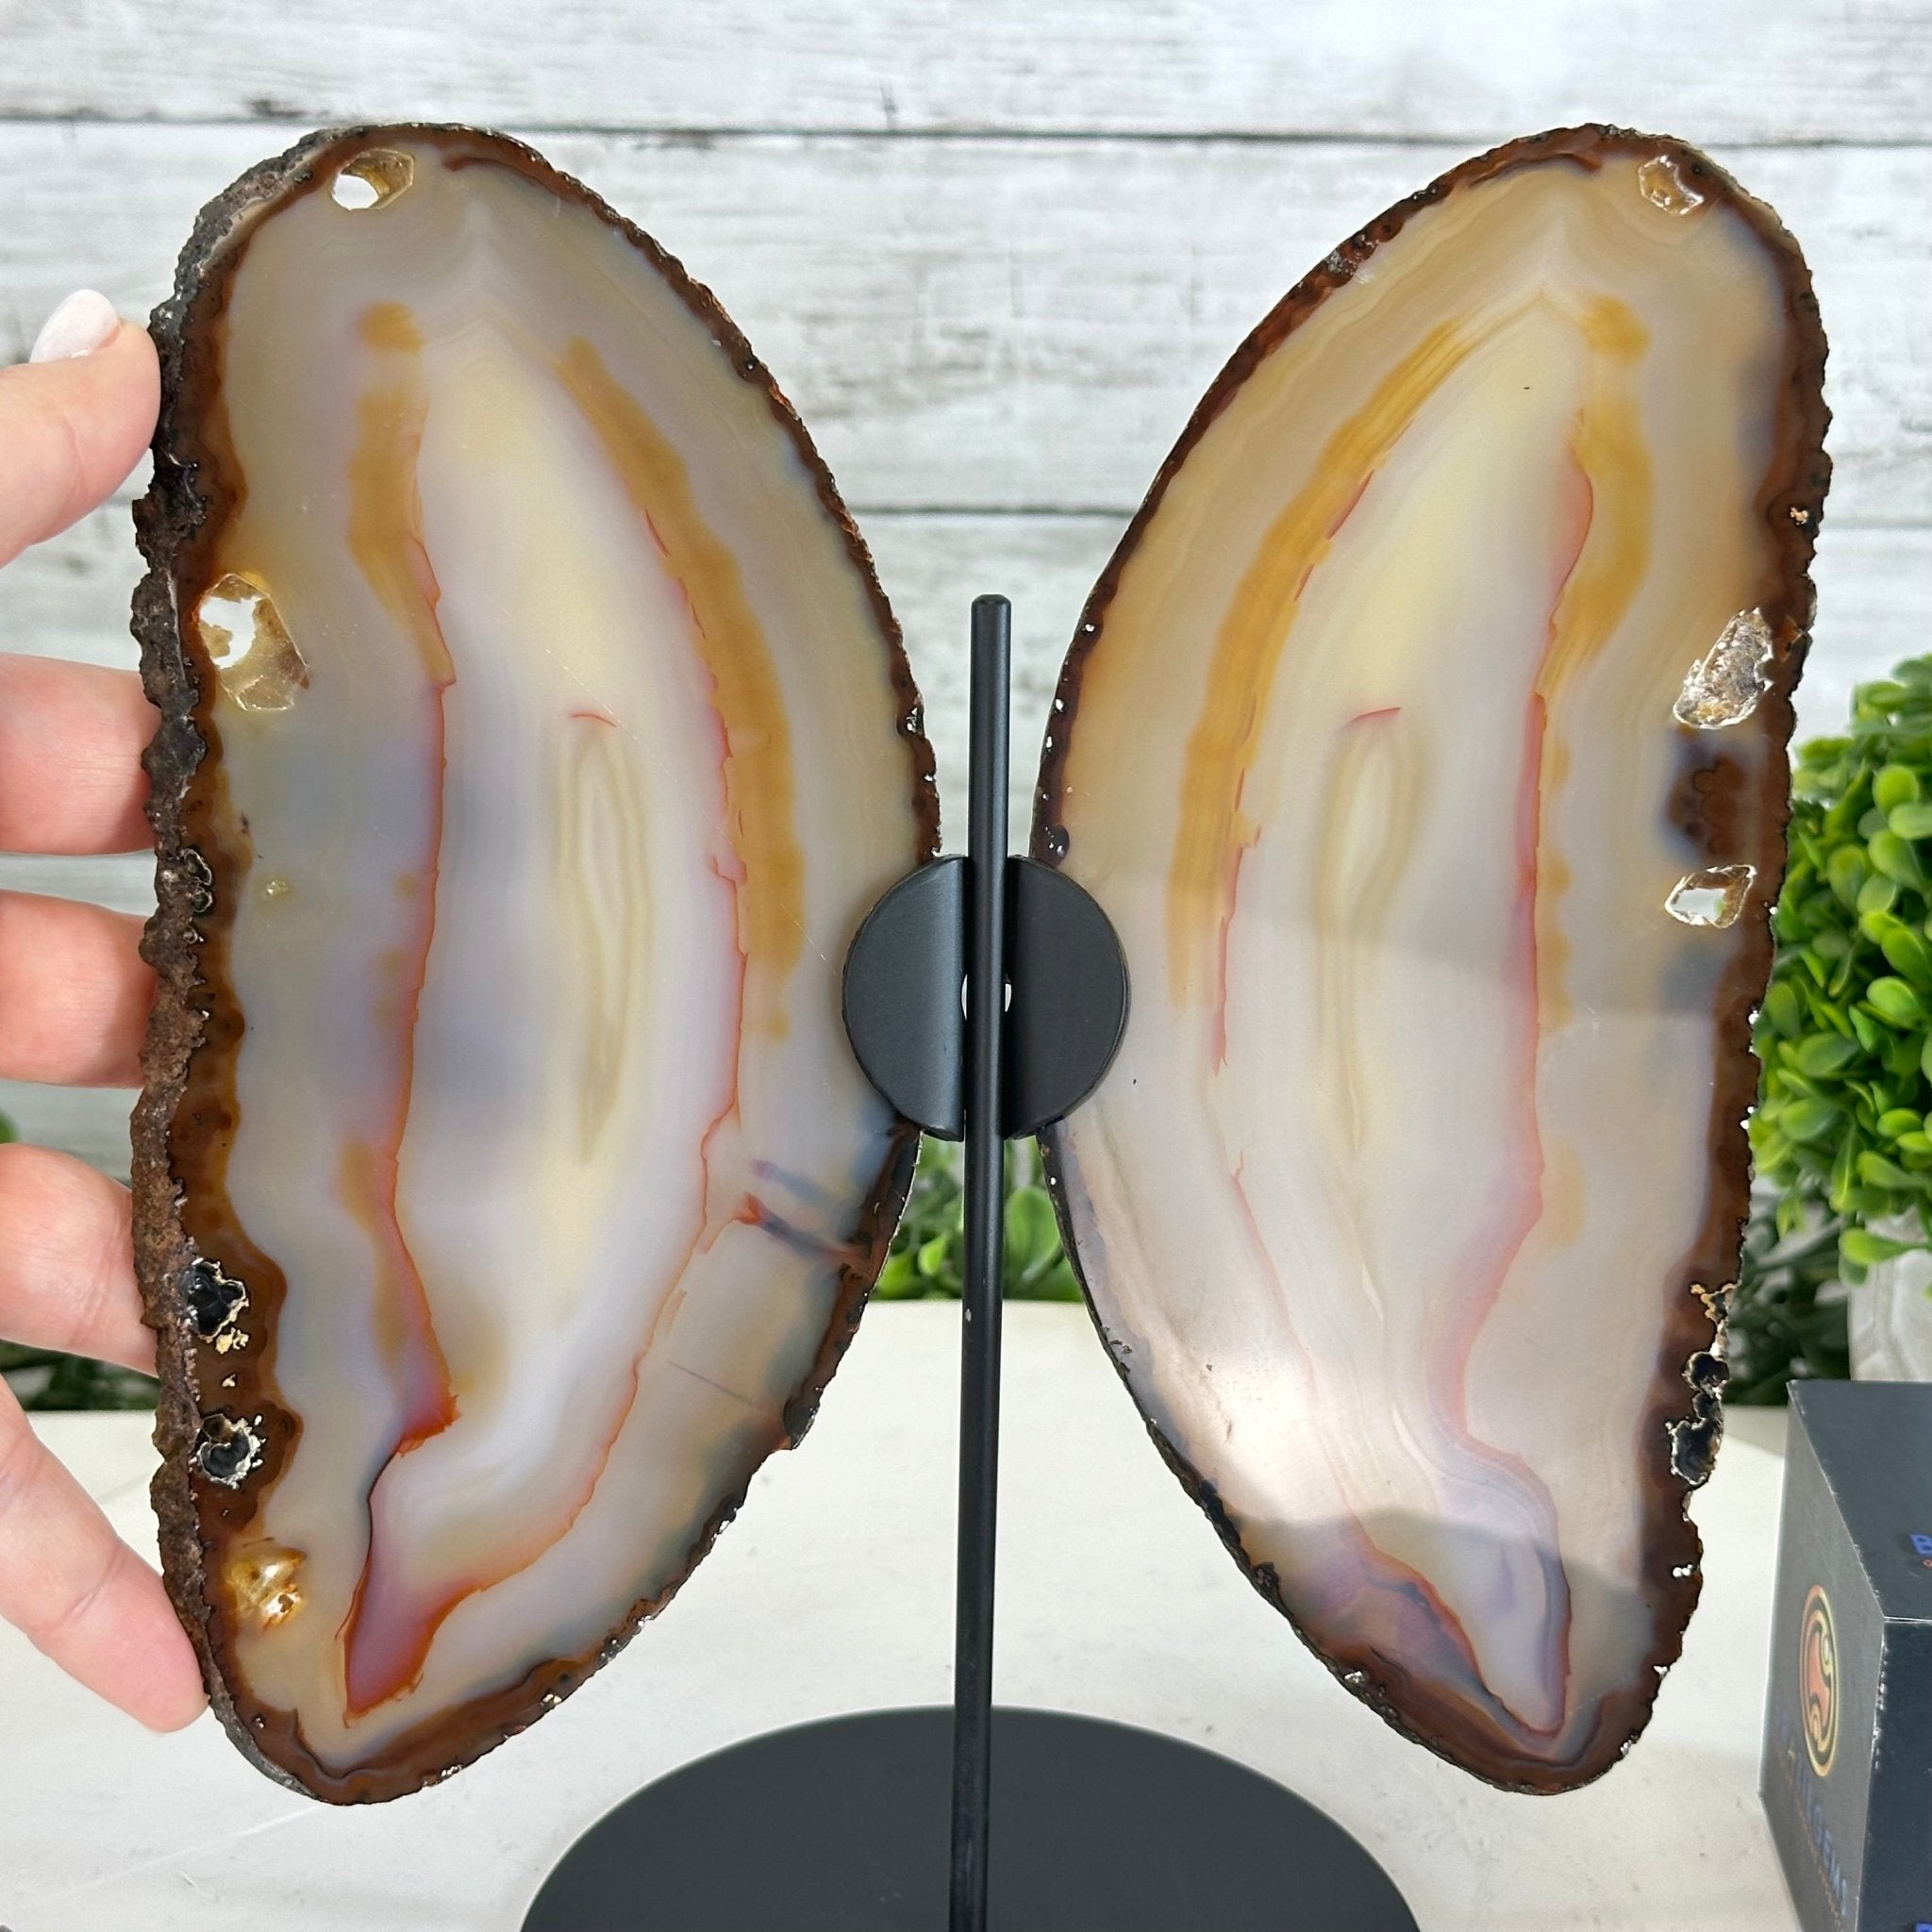 Natural Brazilian Agate "Butterfly Wings", 9.6" Tall #5050NA-105 - Brazil GemsBrazil GemsNatural Brazilian Agate "Butterfly Wings", 9.6" Tall #5050NA-105Agate Butterfly Wings5050NA-105